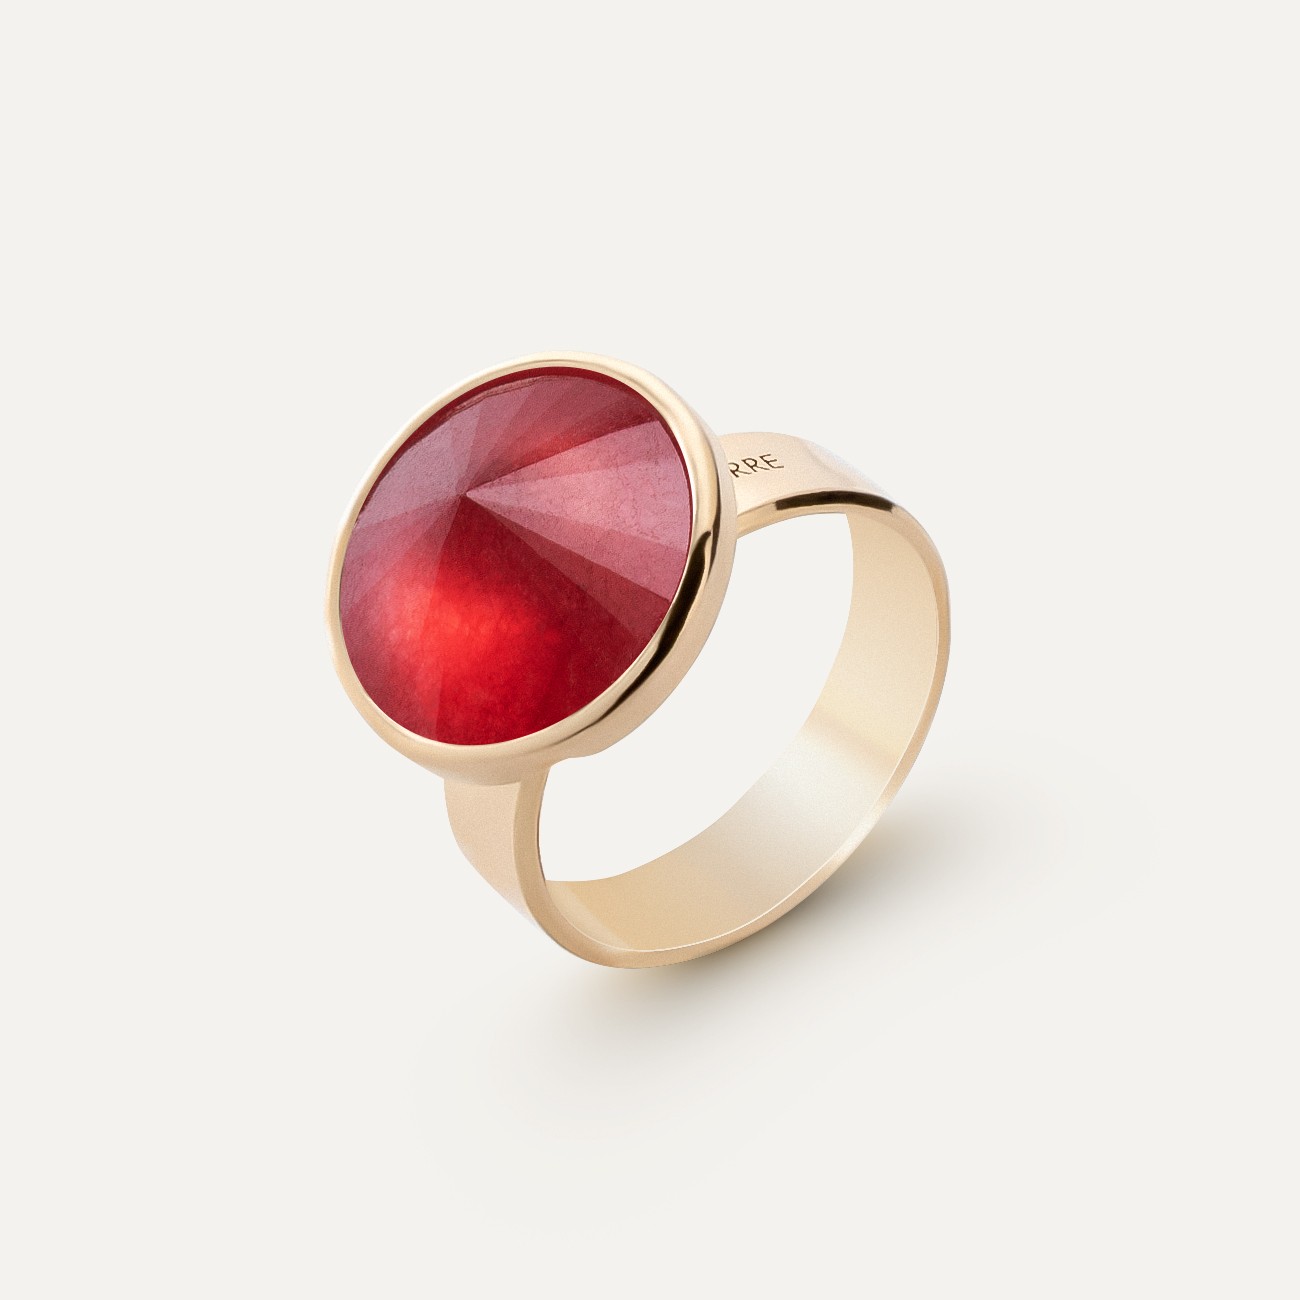 Ring with round natural stone chalcedon, 925